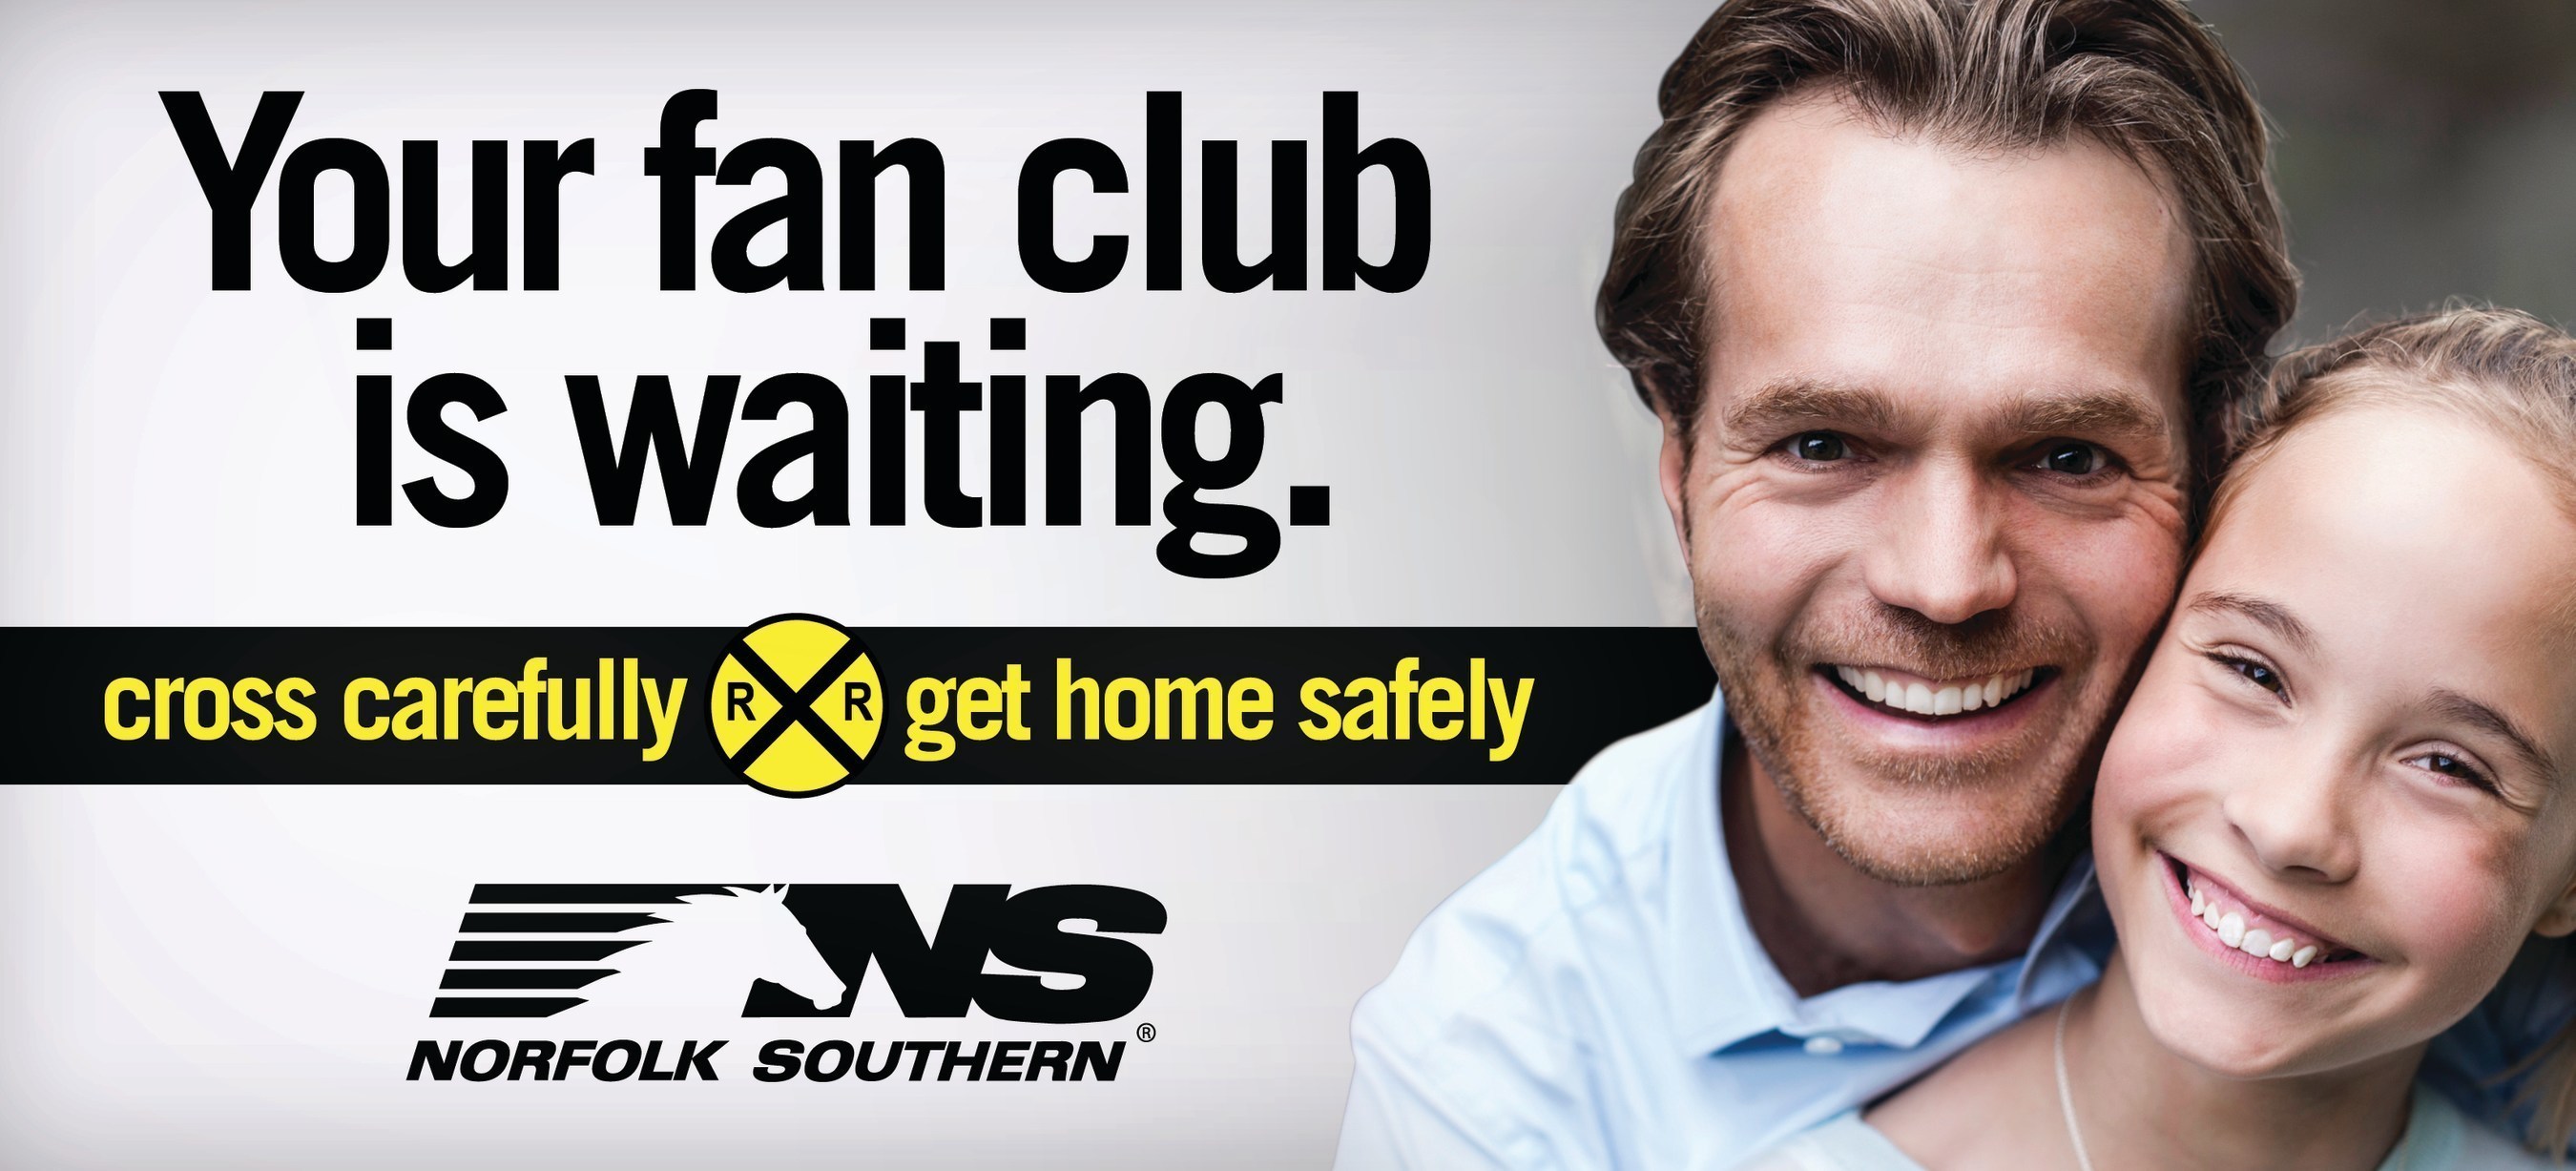 Your fan club is waiting. Get home safely.